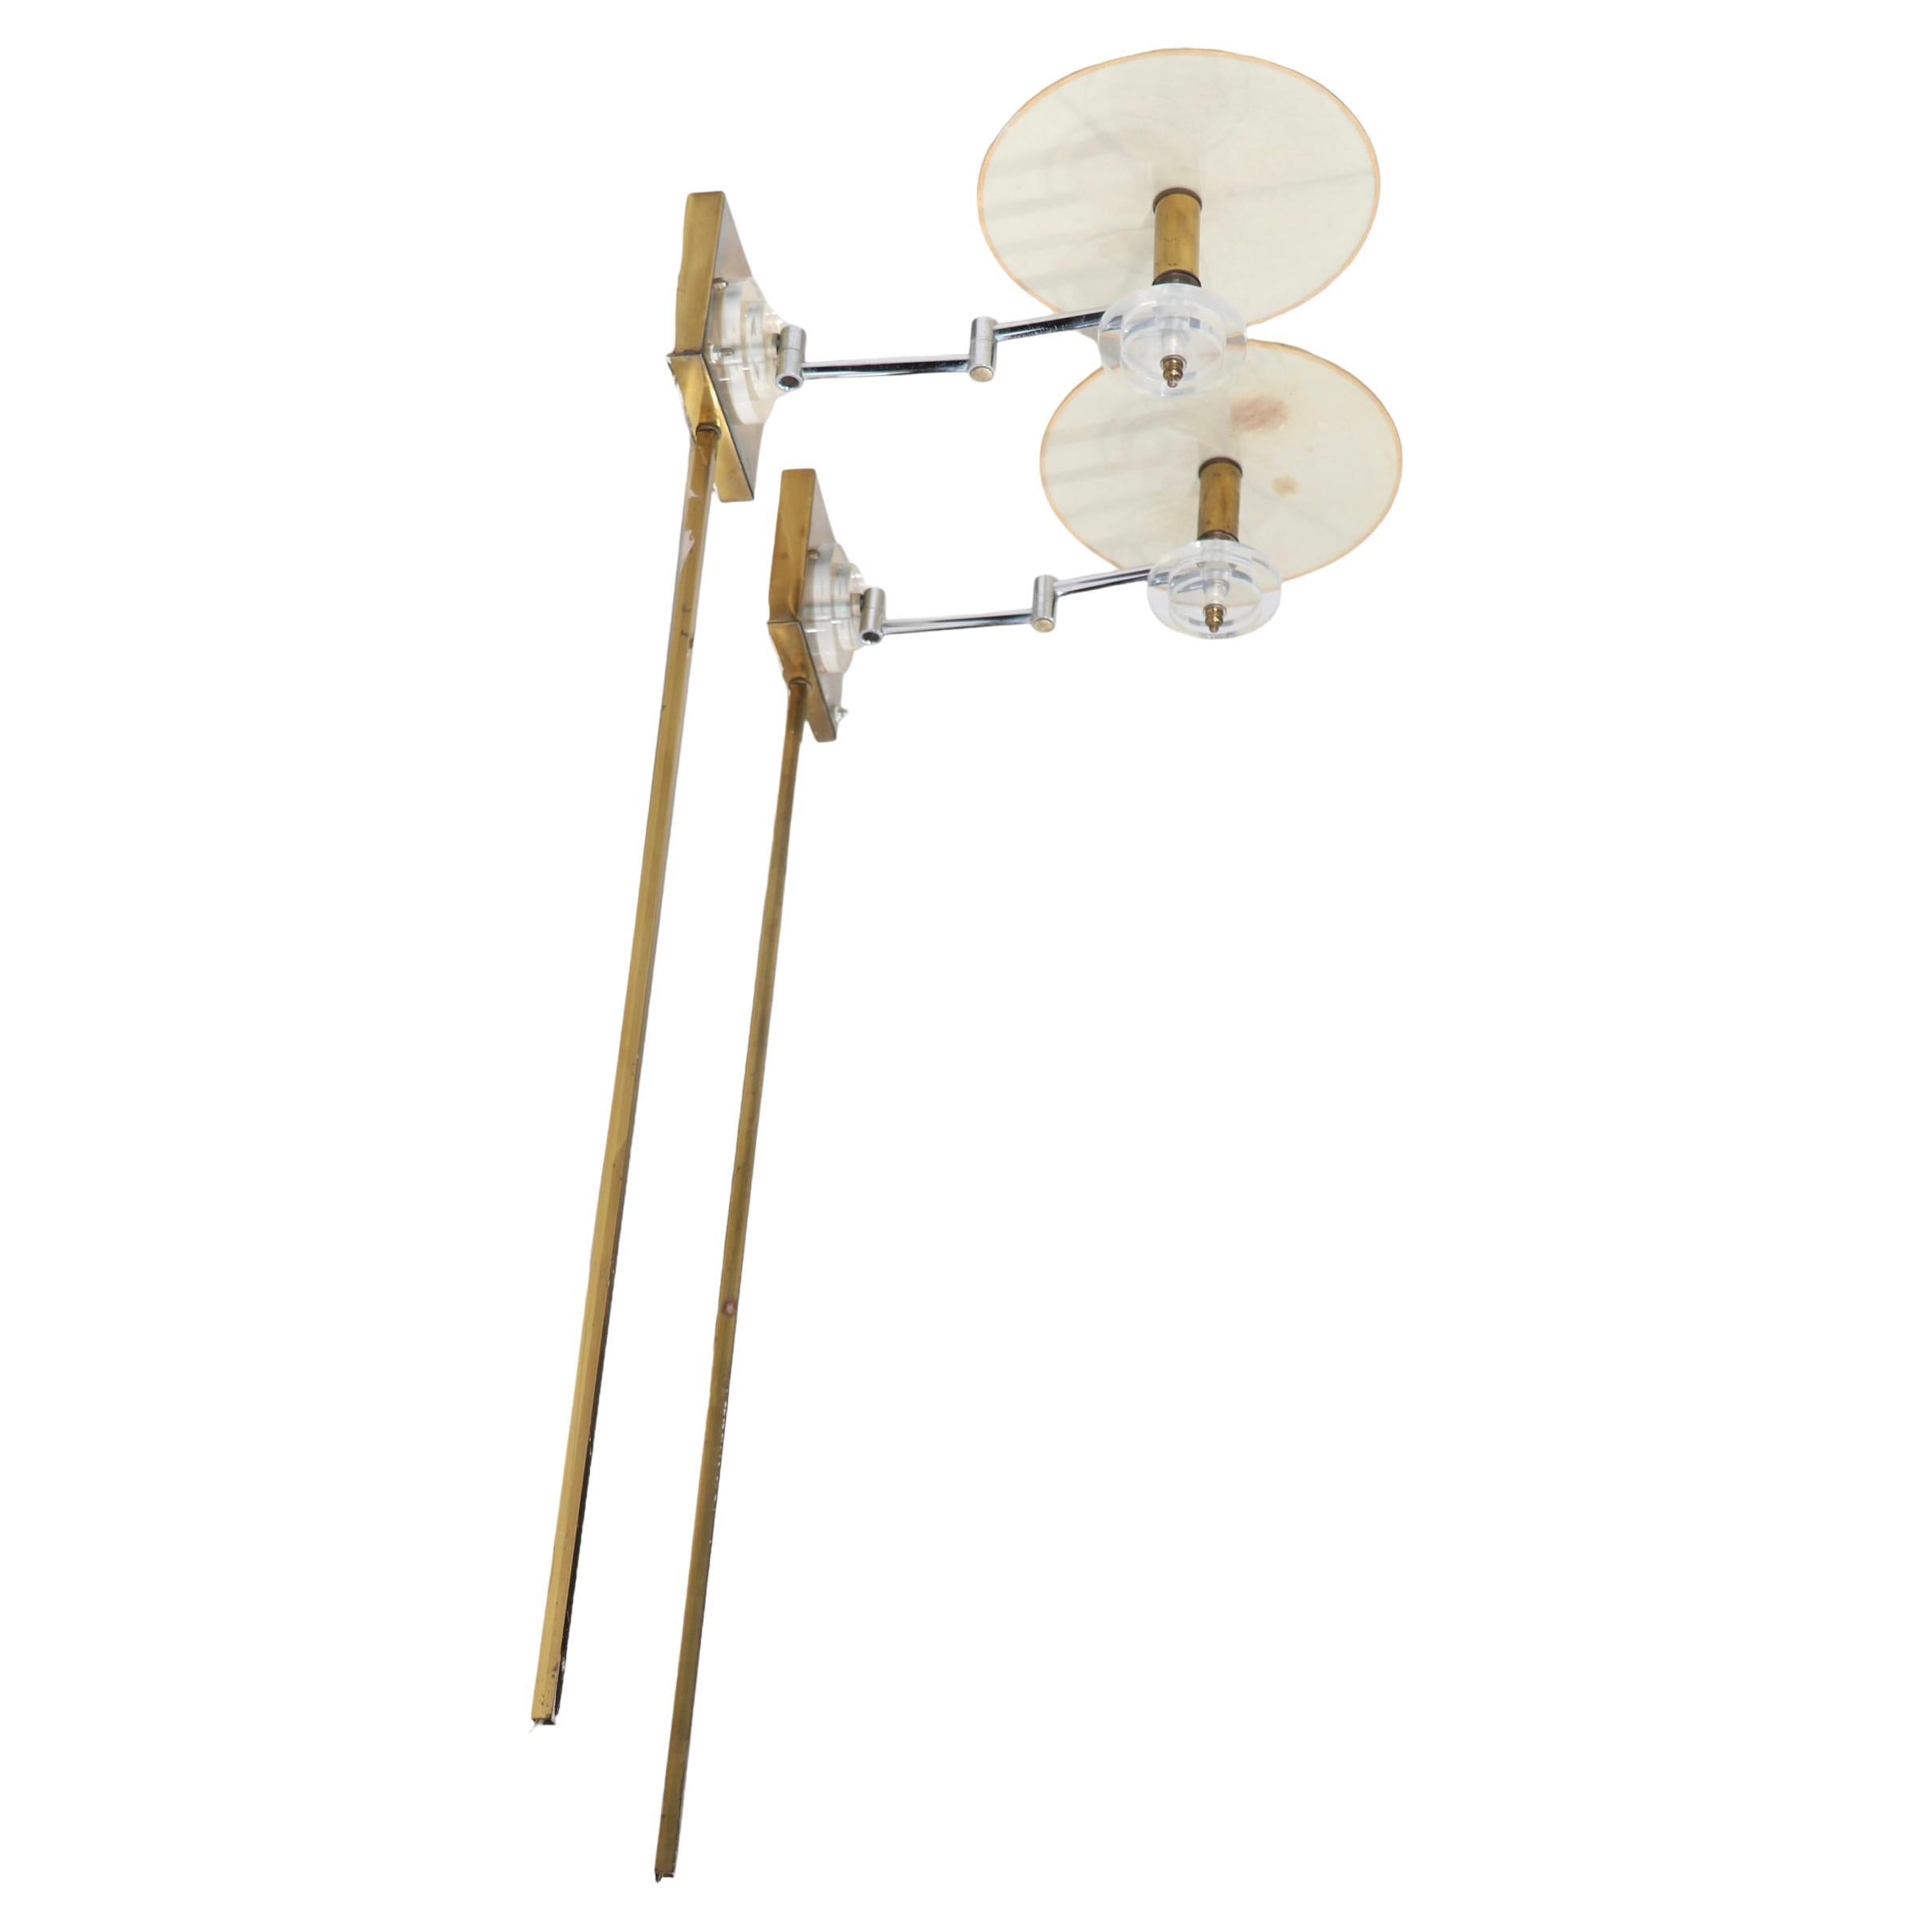 Pr. Hollywood Regency Brass and Lucite Swing Arm  Wall Sconces att. F. Cooper  For Sale